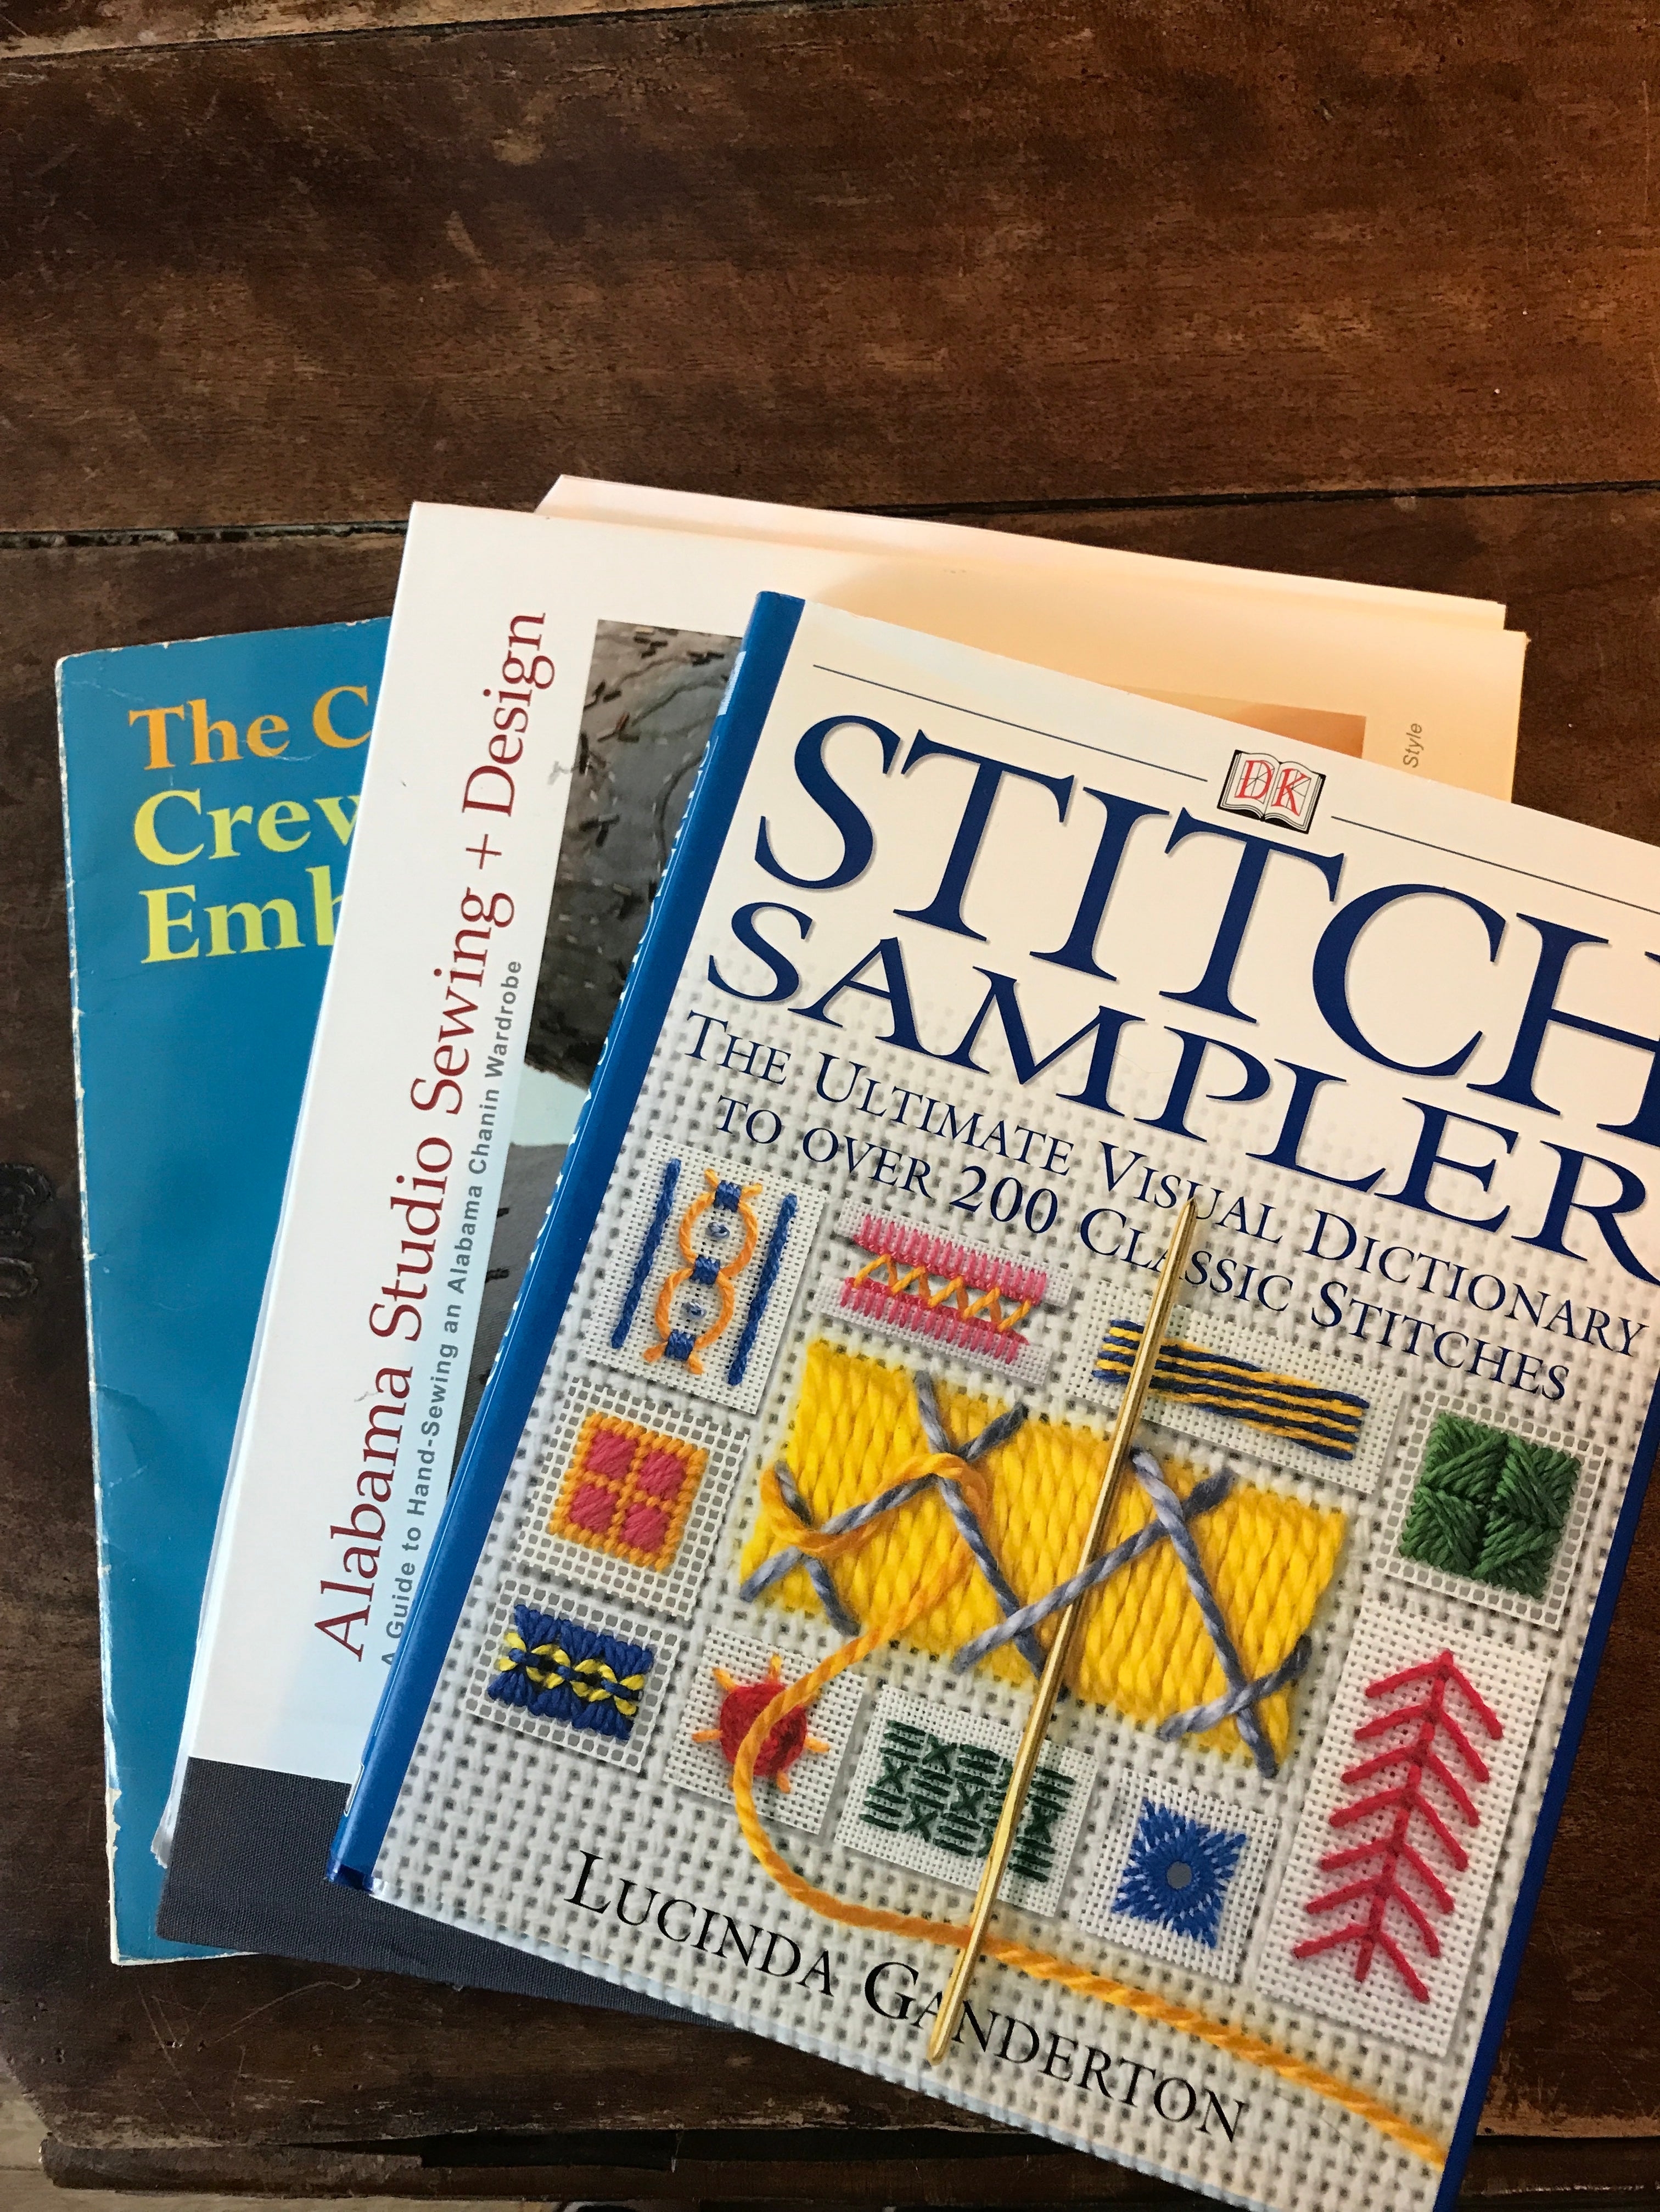 The Geometry of Hand-Sewing: A Romance in Stitches and Embroidery from  Alabama Chanin and The School of Making (Alabama Studio)